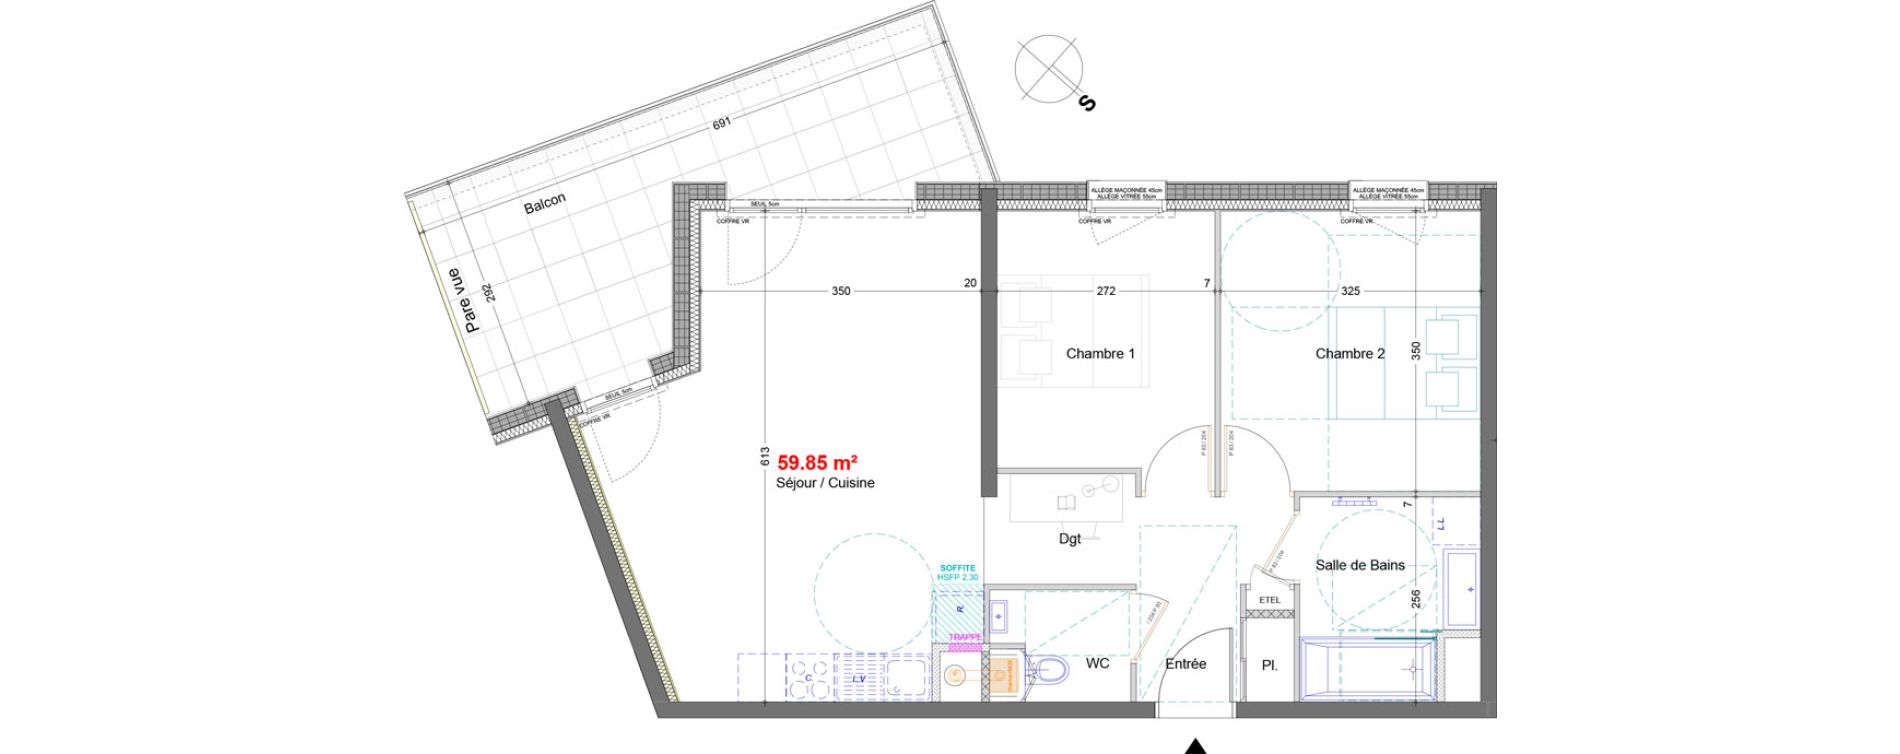 Appartement T3 de 59,85 m2 &agrave; &Eacute;pagny Epagny metz-tessy